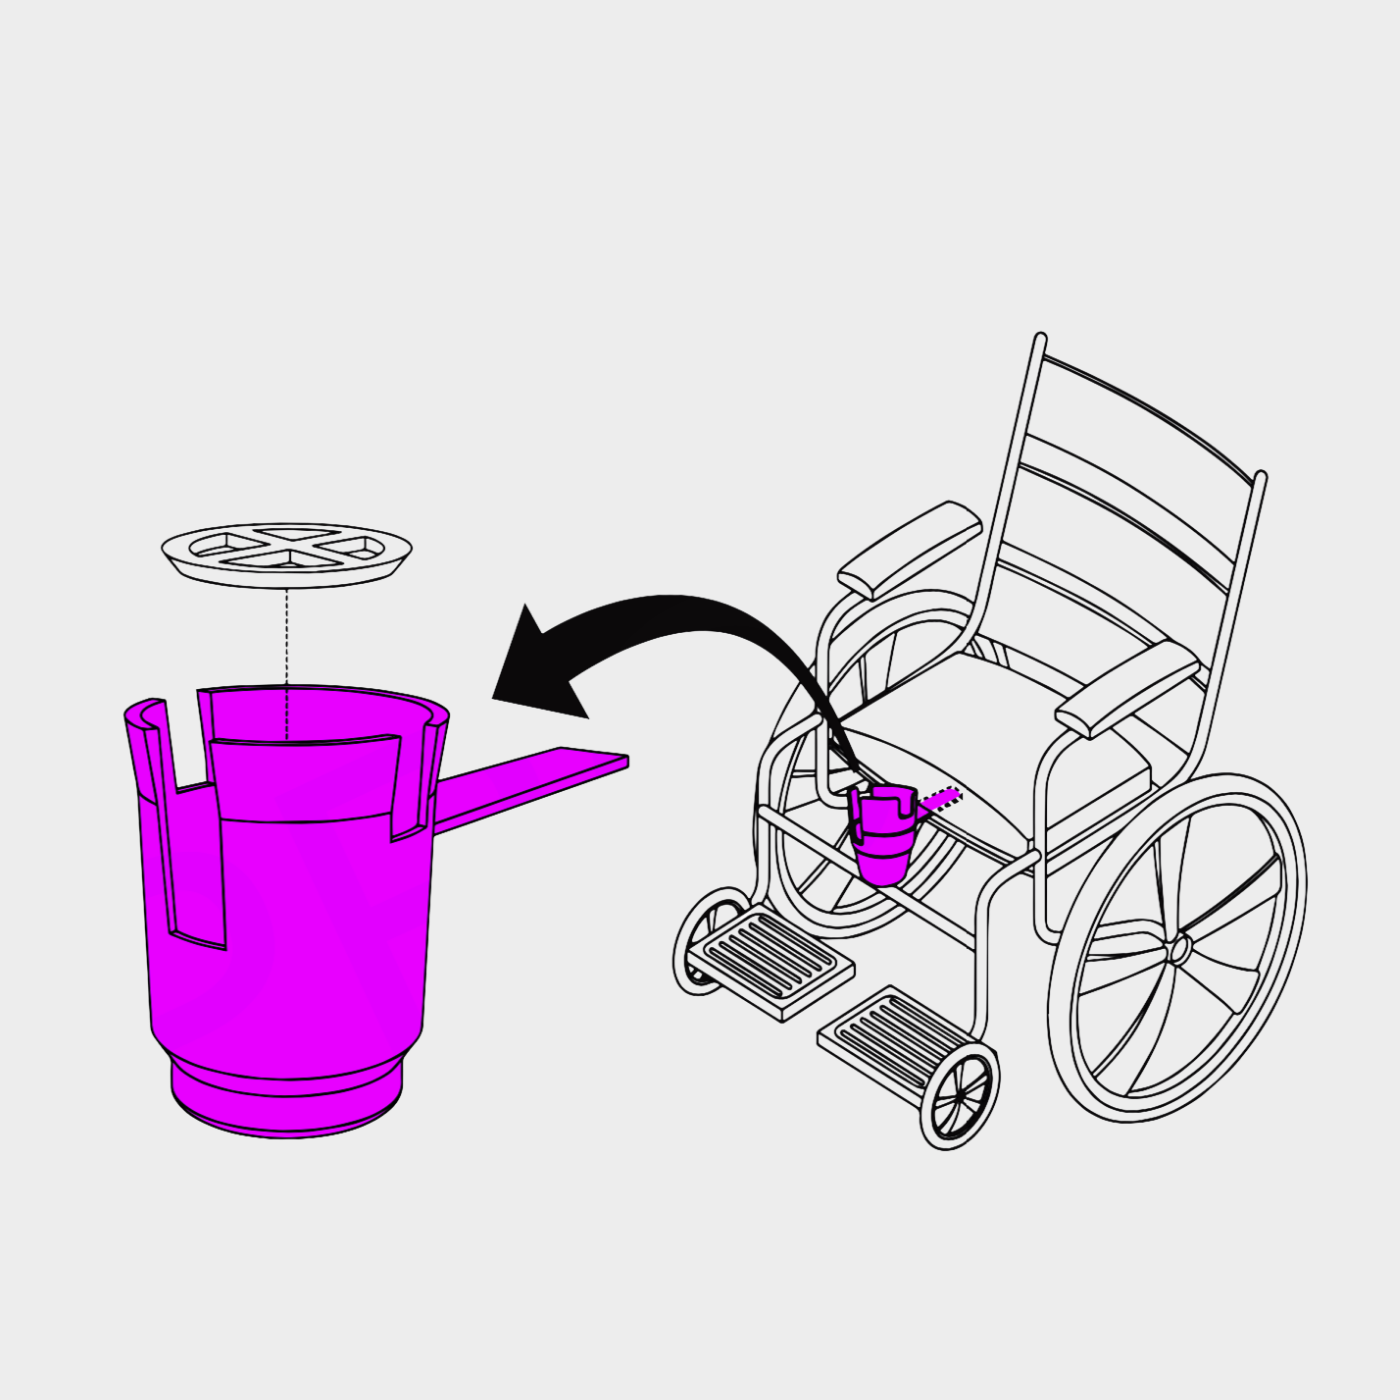 HandiCup line drawing. Insert the arm of the HandiCup under your wheelchair seat cushion to install securely.